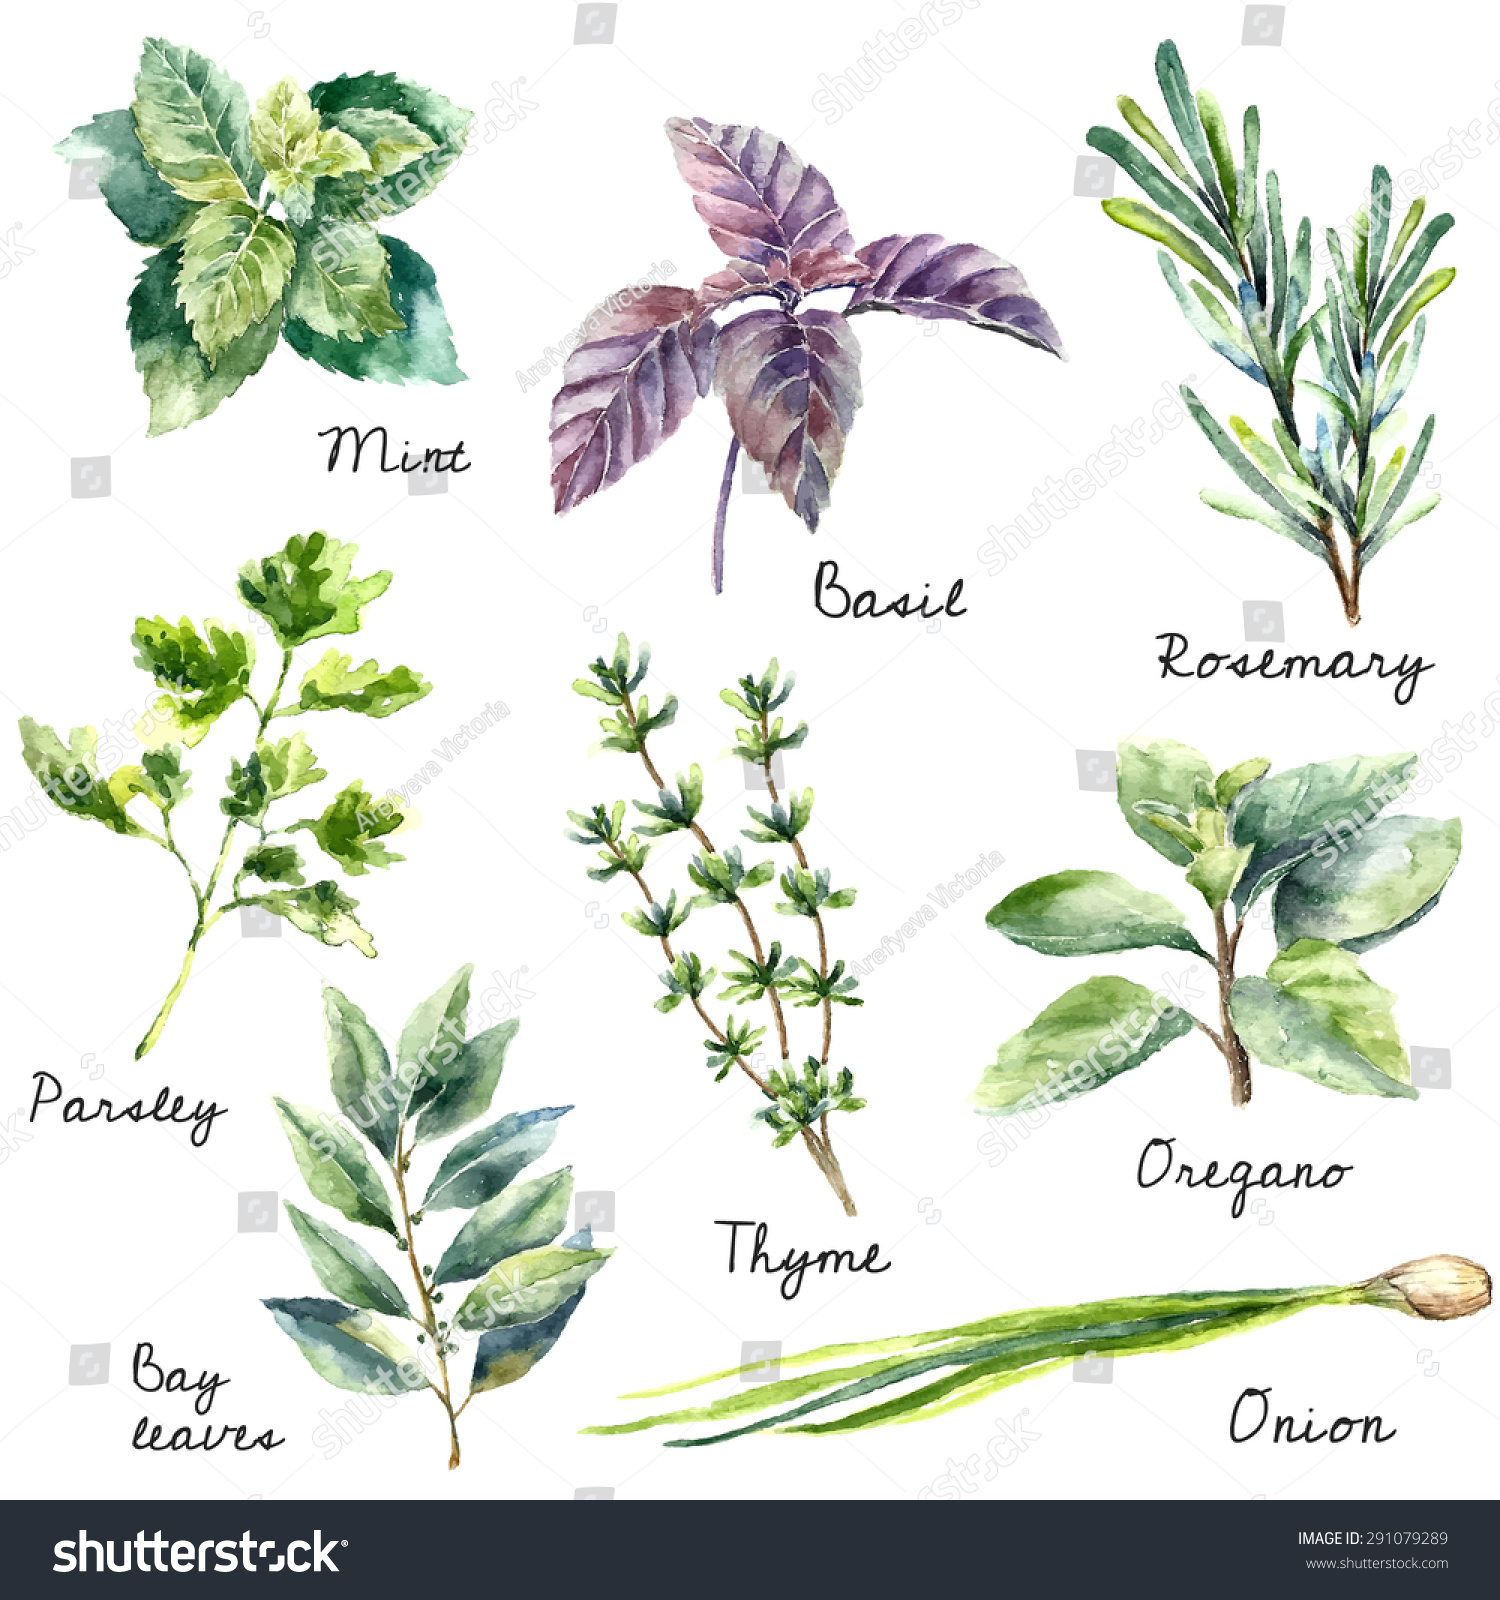 Watercolor collection of fresh herbs isolated: mint, basil, rosemary, parsley, oregano, thyme, bay leaves, green onion.Herbs vector object isolated on white background. Kitchen herbs and spices banner #291079289